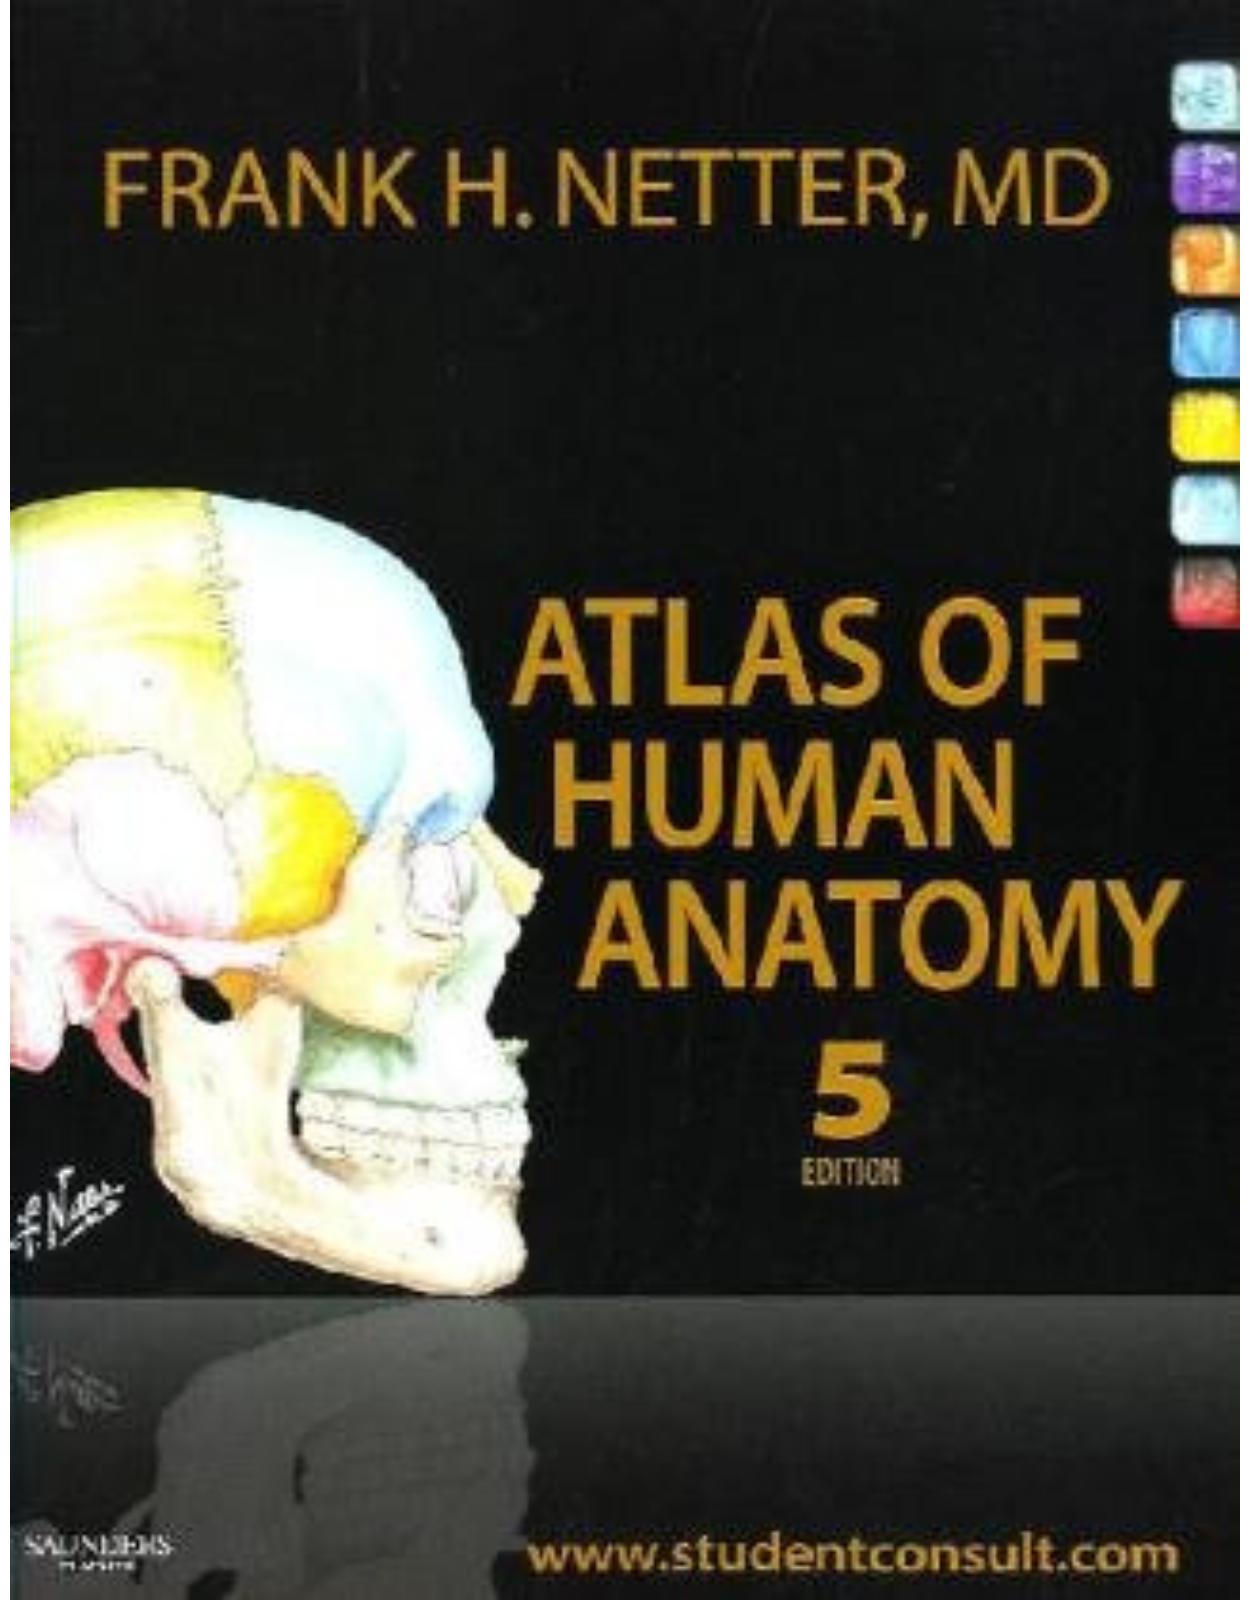 Atlas of Human Anatomy: with Student Consult Access, 5e 